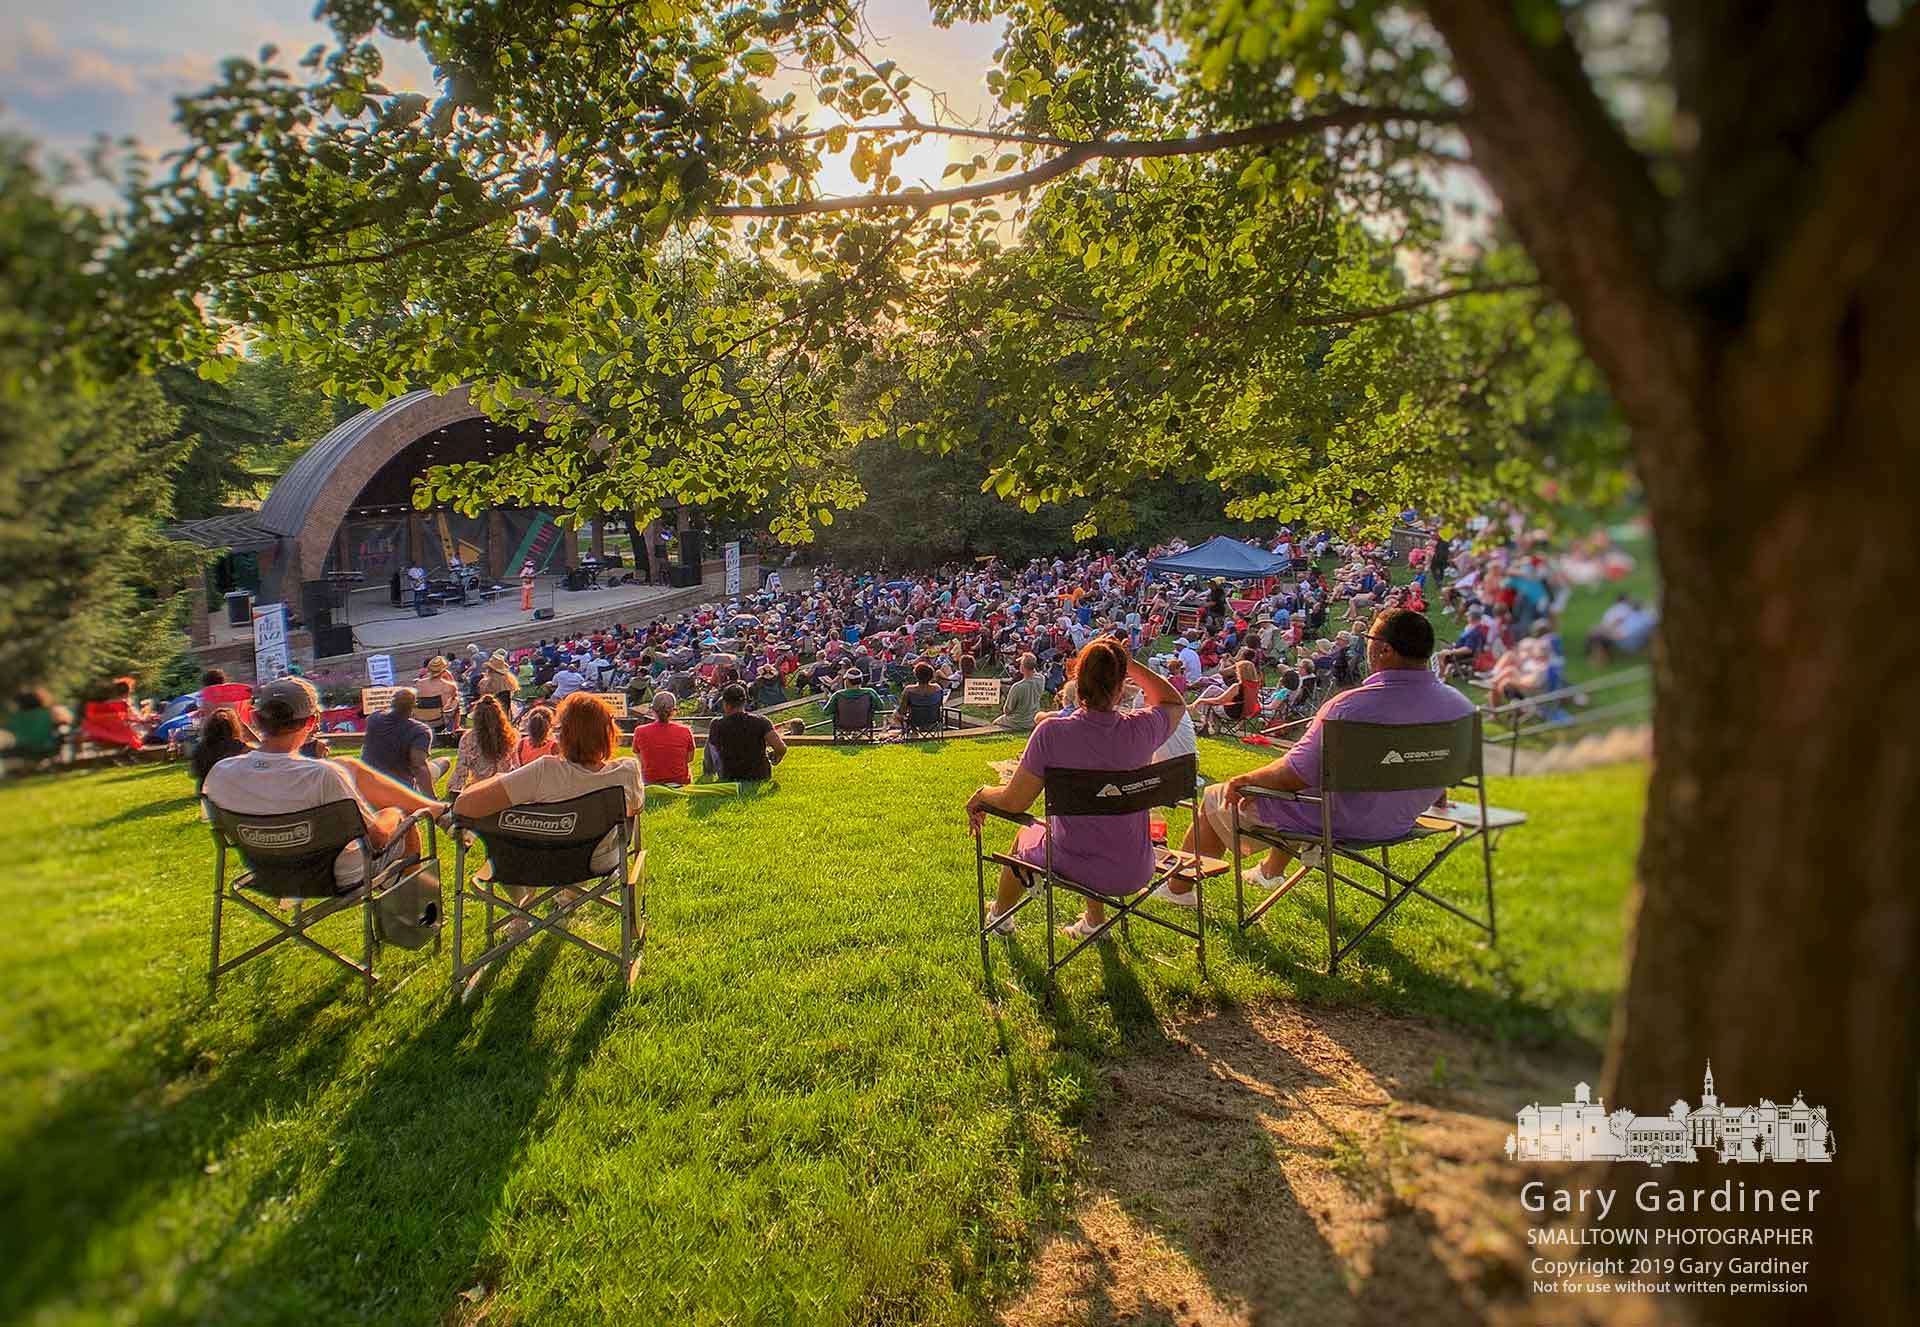 A Saturday evening crowd sits under the setting summer sun listening to jazz played in the amphitheater at Alum Creek Park on West Main in Westerville. My Final Photo for June 29, 2019.